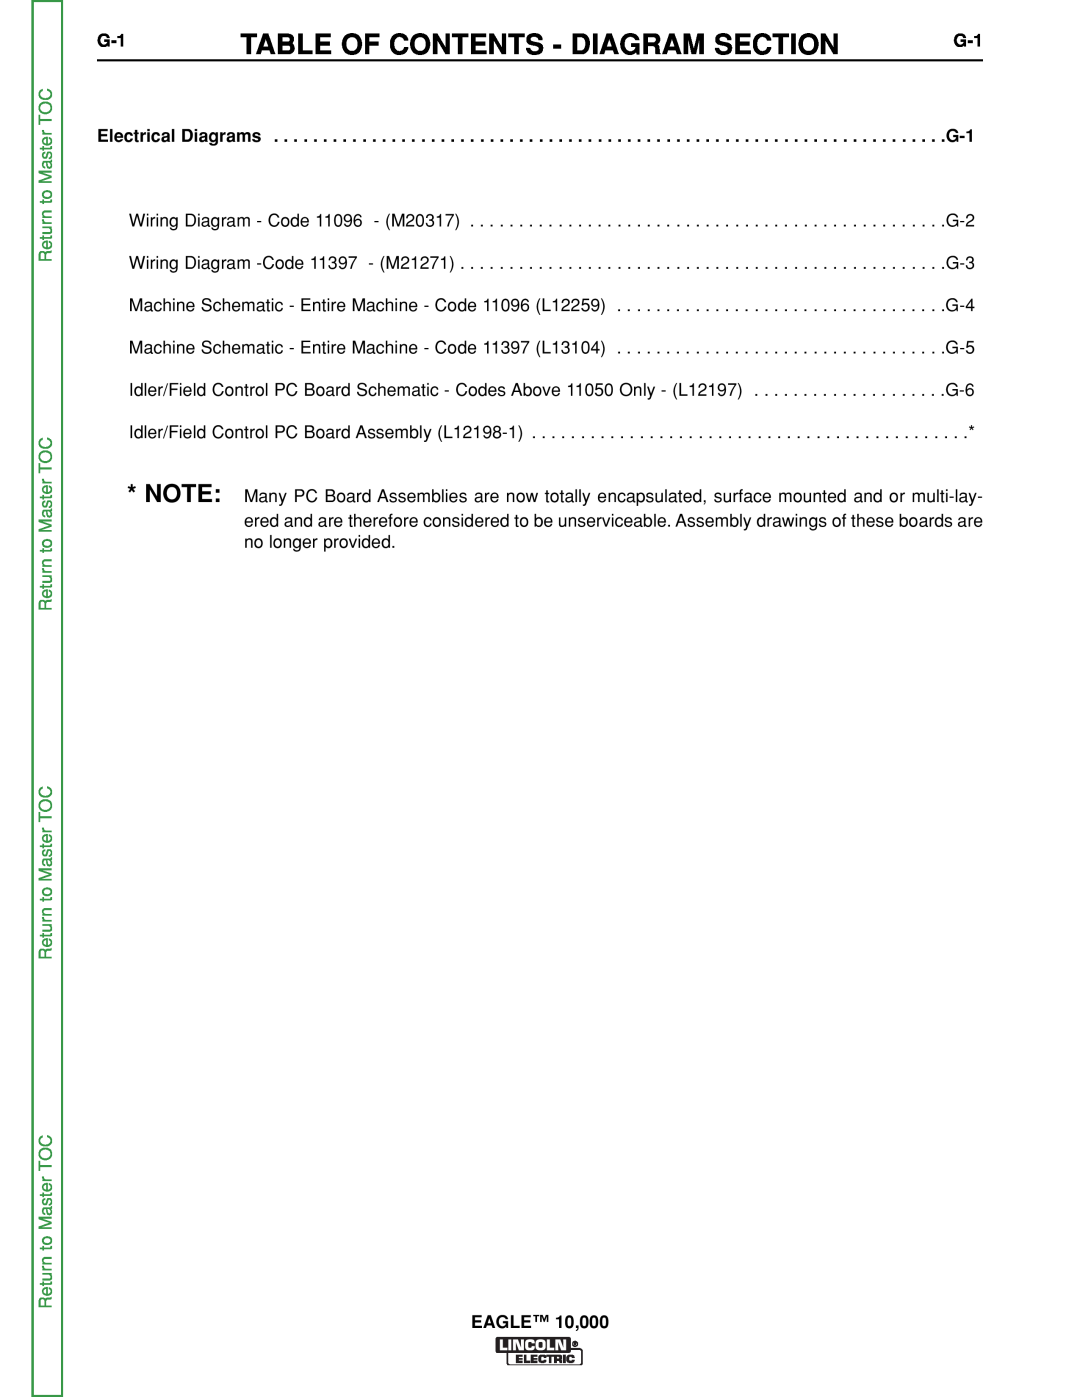 Lincoln Electric SVM192-A service manual Table Of Contents - Diagram Section, Return to Master TOC, EAGLE 10,000 